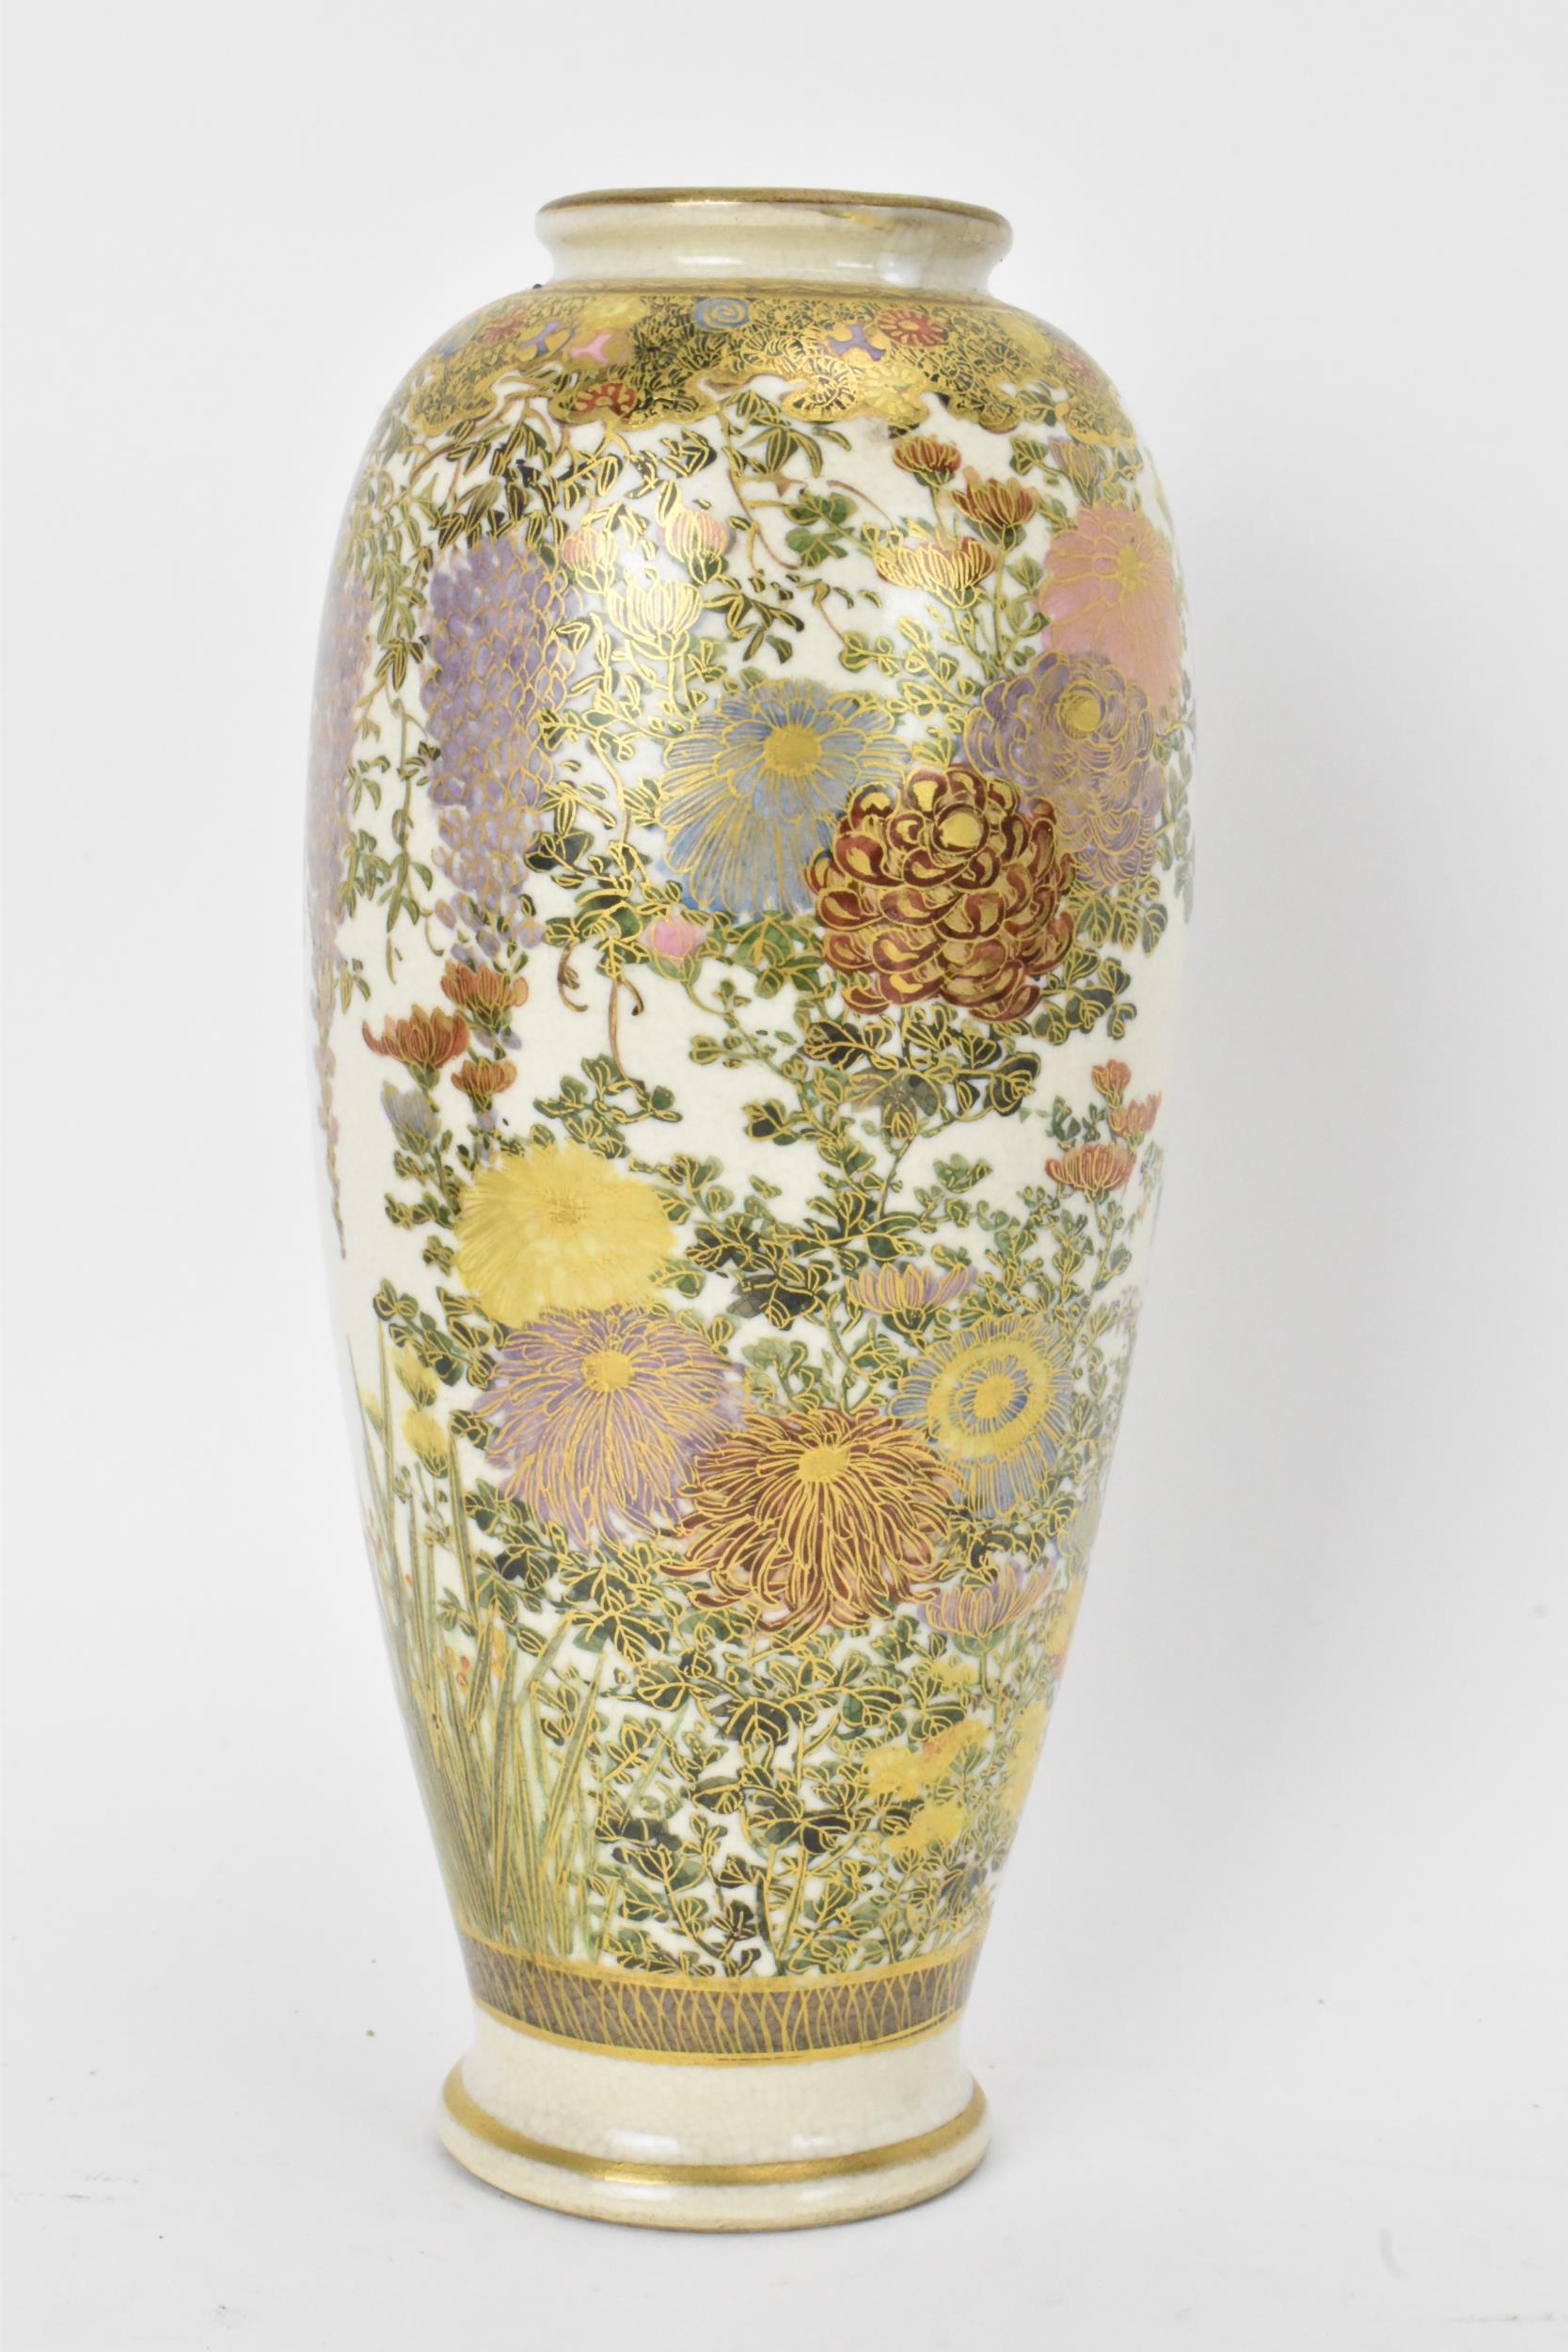 A Japanese Meiji period satsuma vase, of ovoid shape with flared rim, decorated with floral sprays